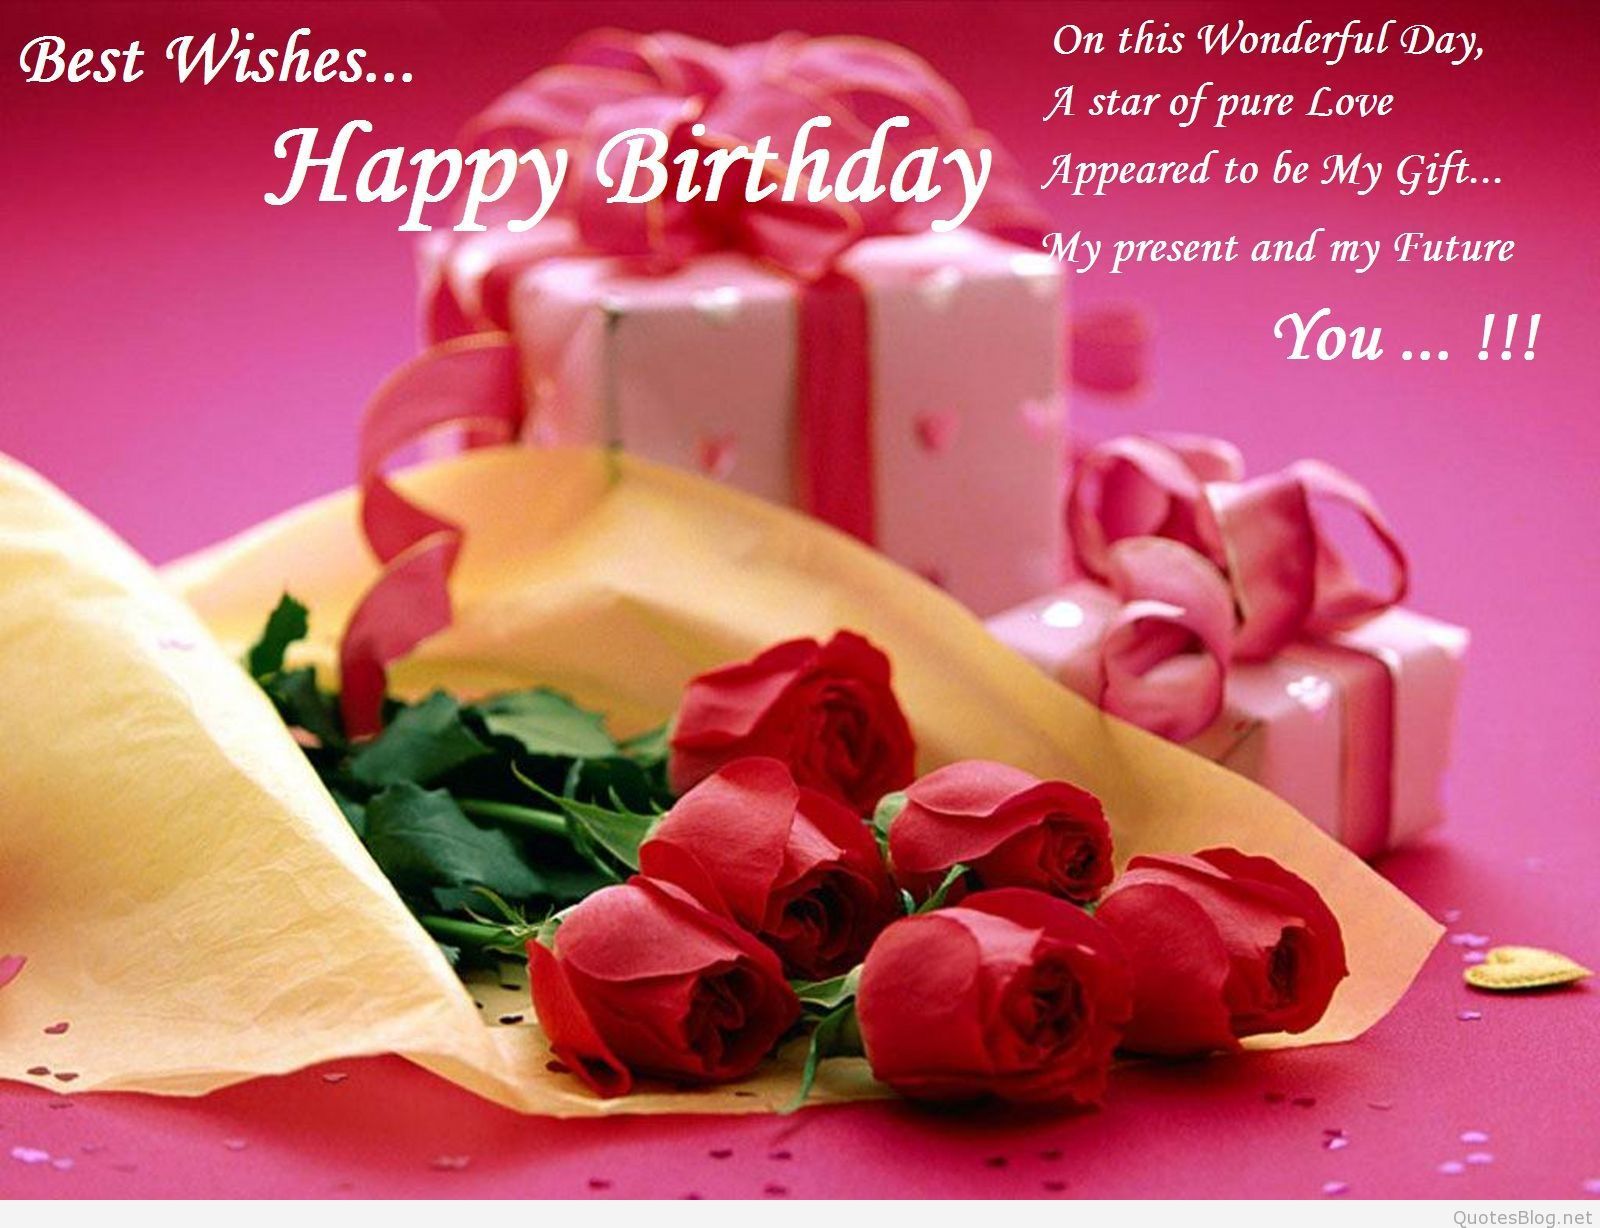 Birthday Greetings Images Free Download